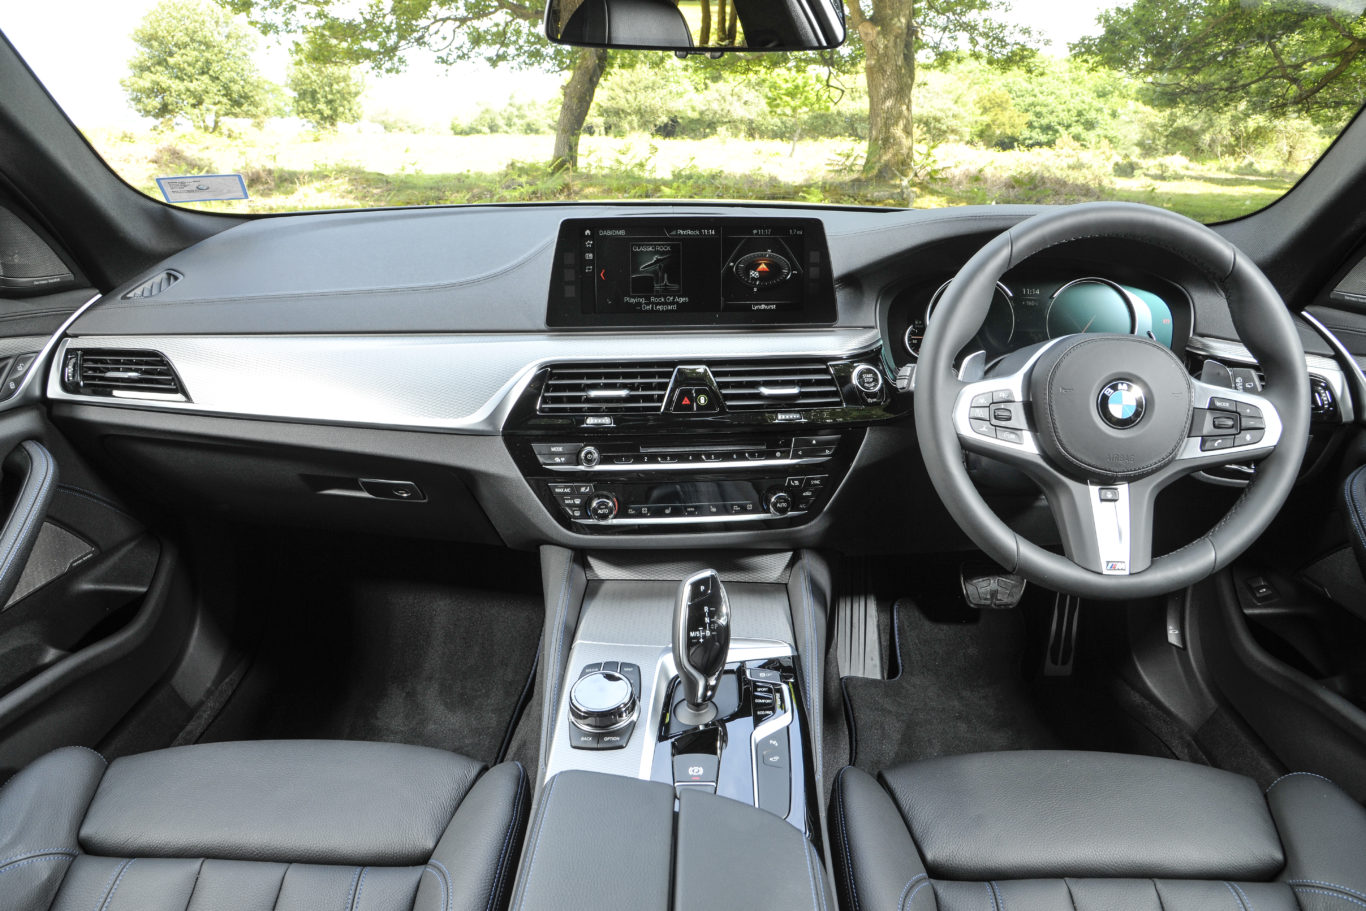 The interior is well laid out and easy to navigate